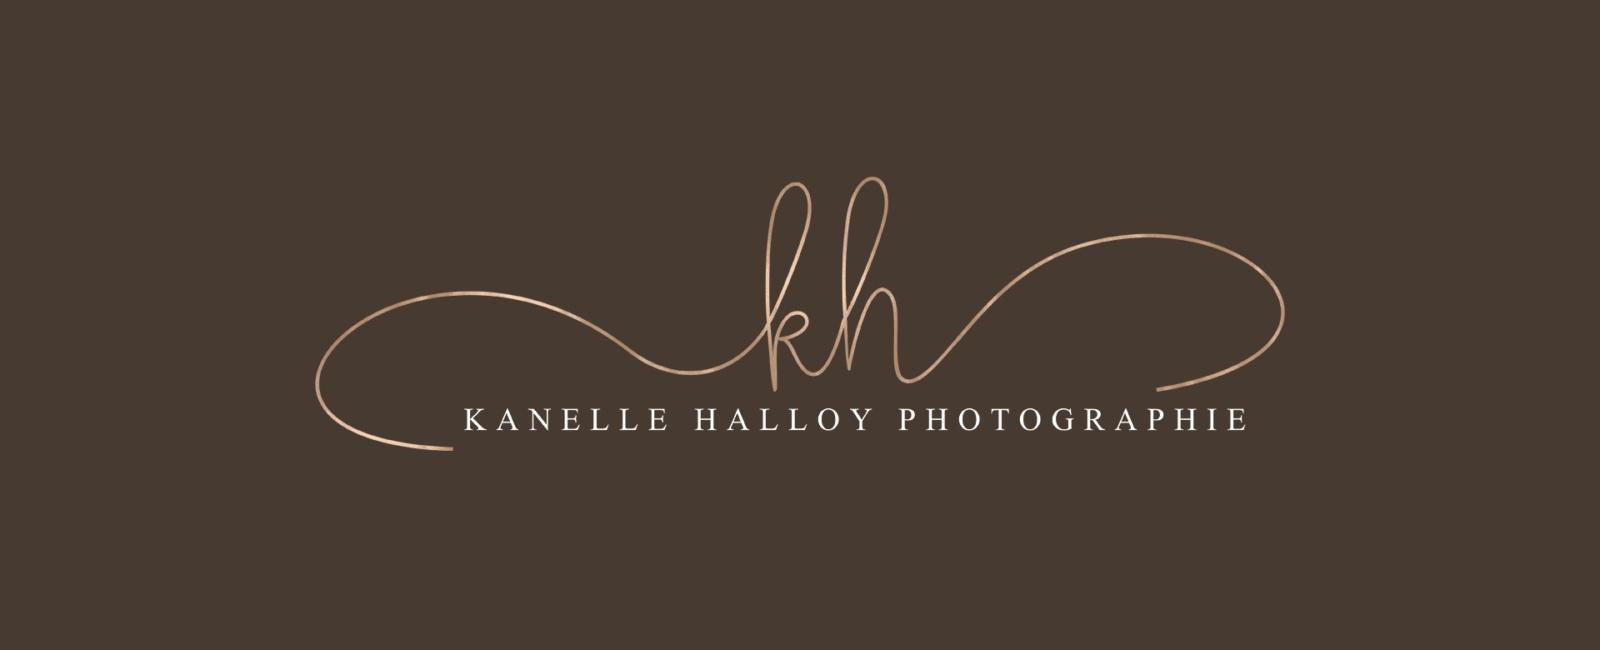 Kanelle-Photographie